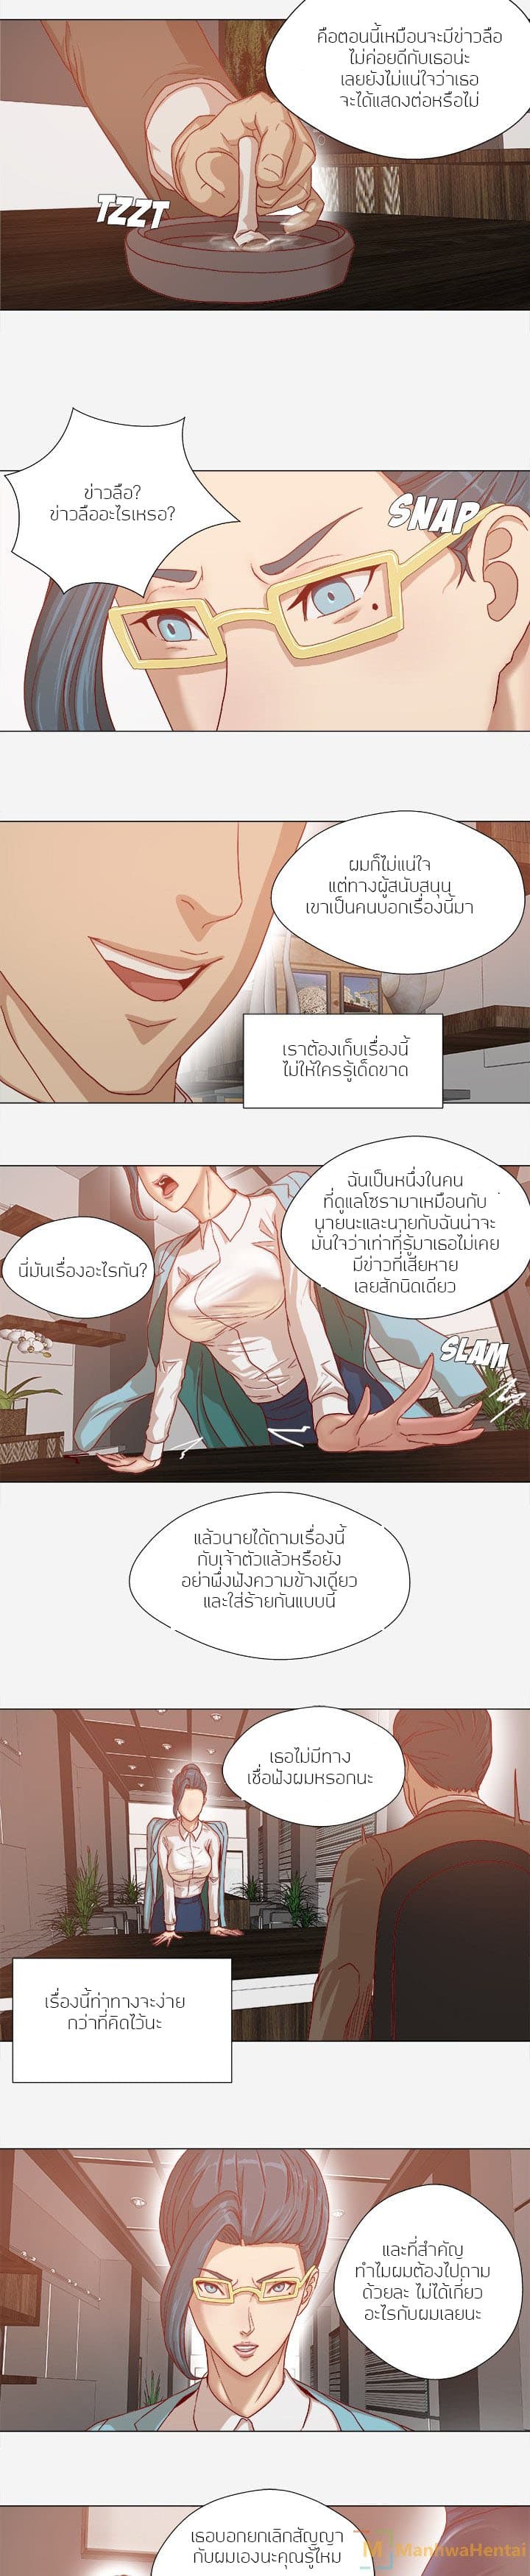 The Good Manager - หน้า 2